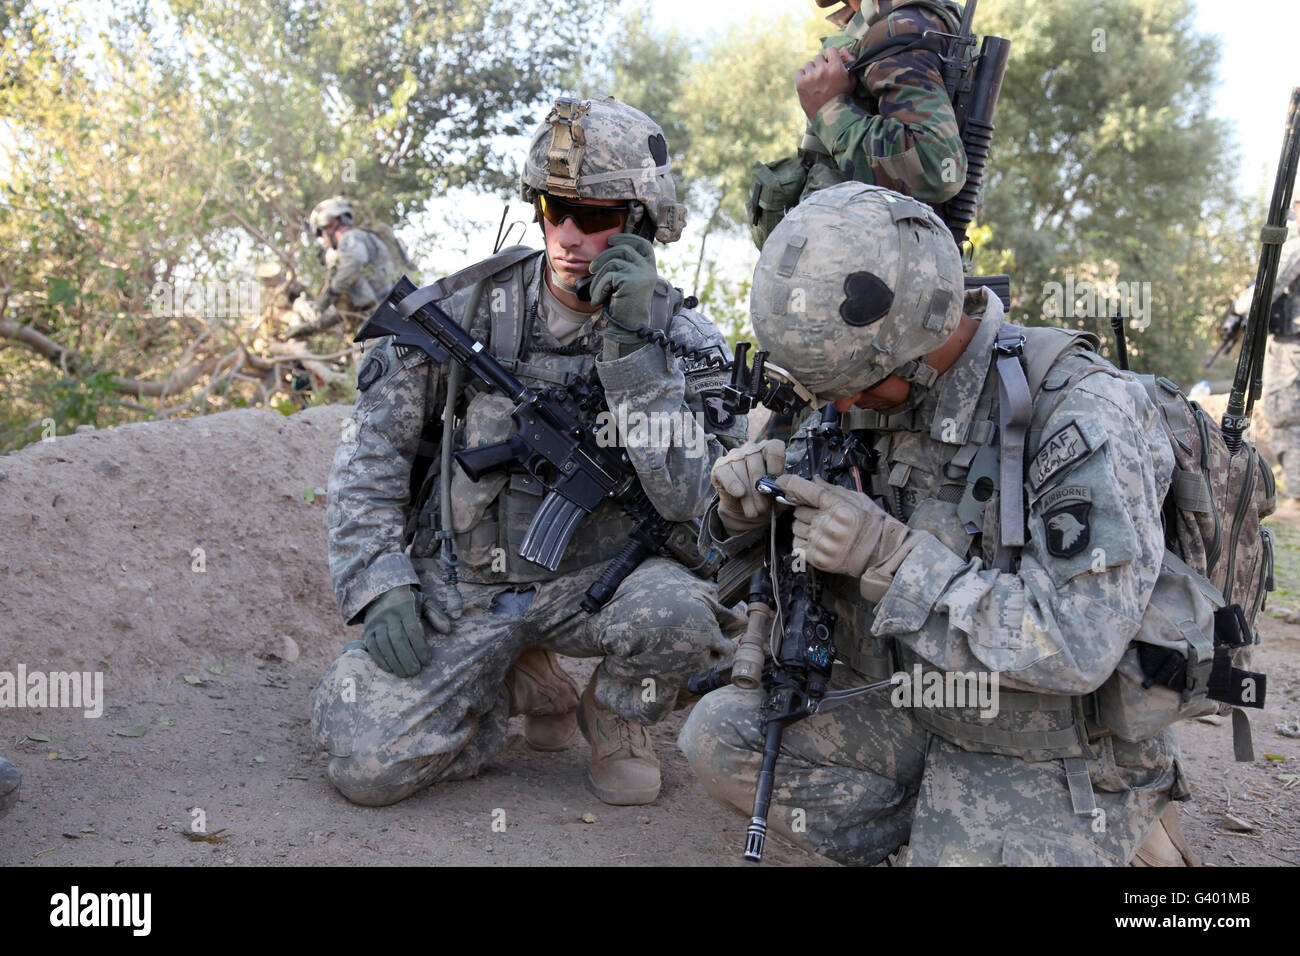 U.S. Army soldier radios in his team's status. Stock Photo